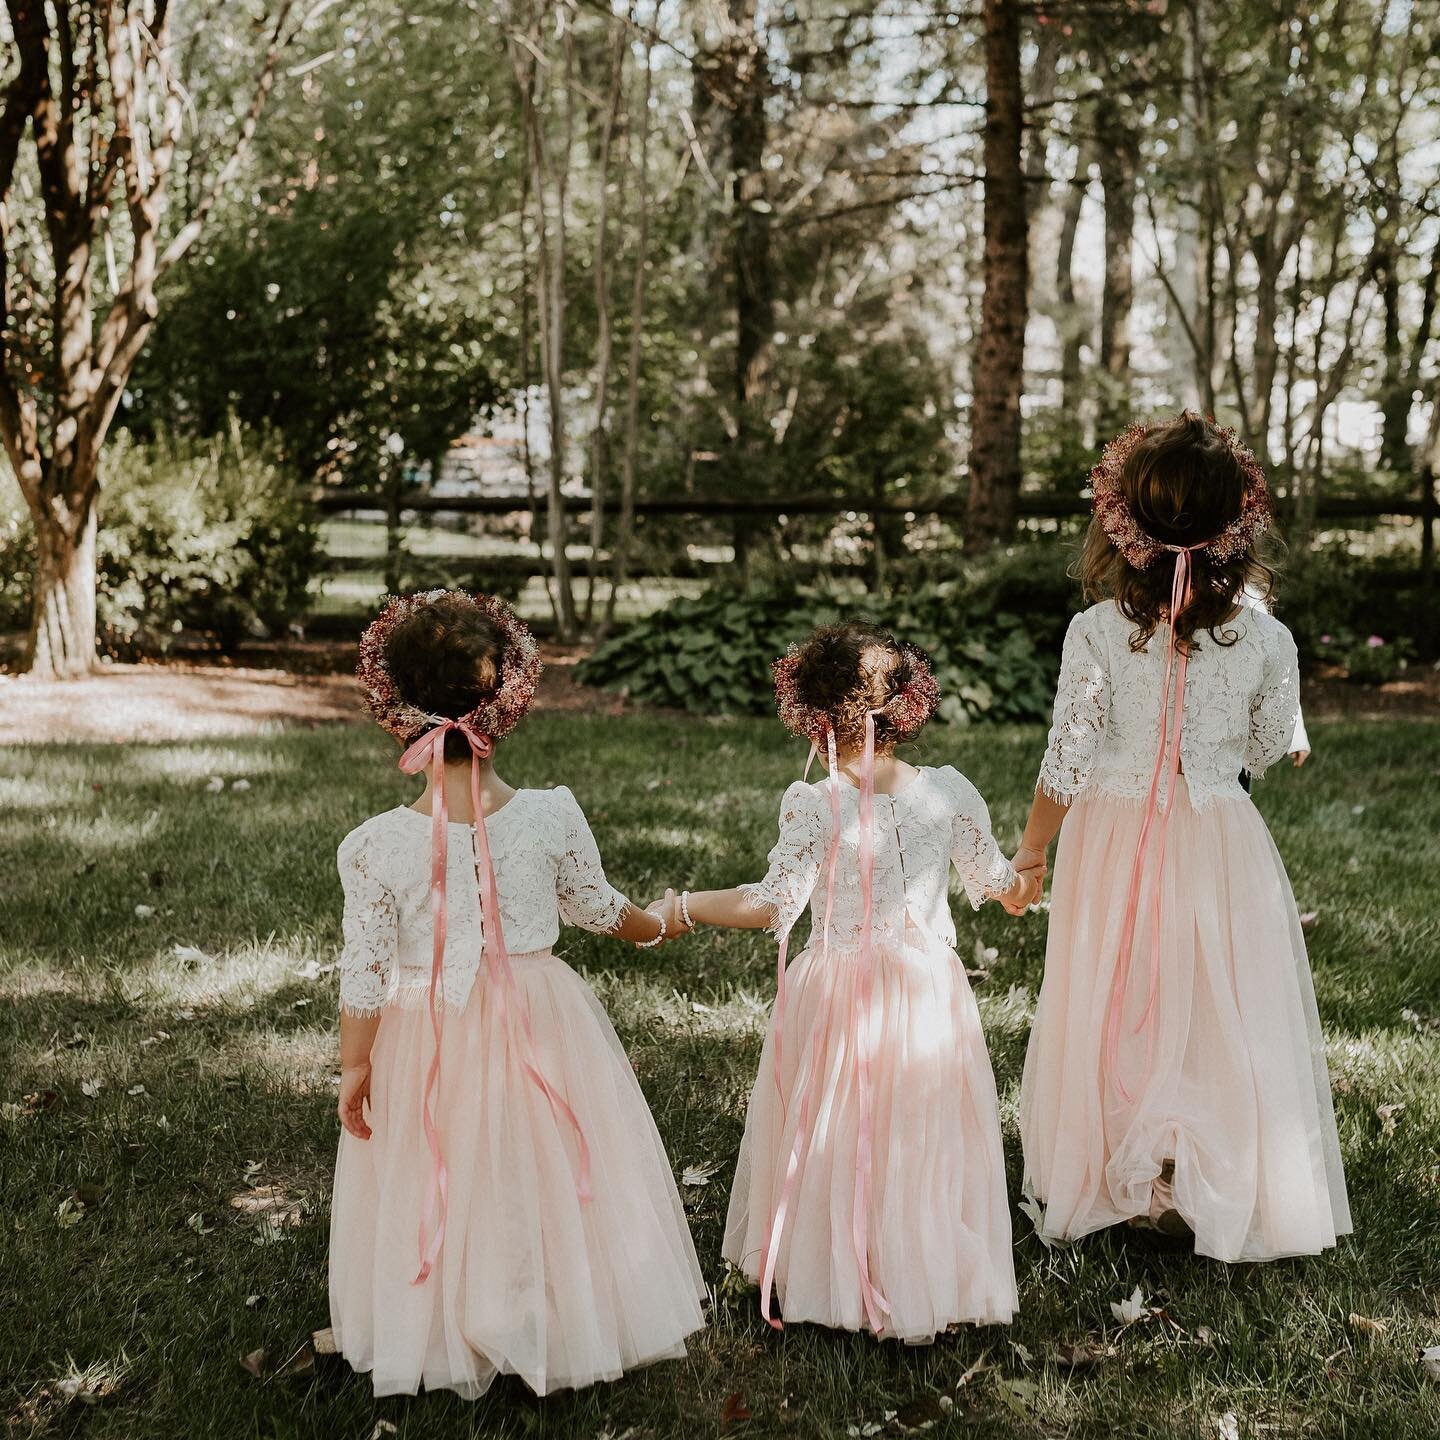 We get by with a little help from our friends! Reminiscing about these tiny flower goodnesses stealing the show! 👧🏻🌸👧🏻🌸👧🏻
______
The dream team behind the photo:
Planning + Design:&nbsp;
@featherandrockevents 
Floral Design: @vowscreative 
Ph